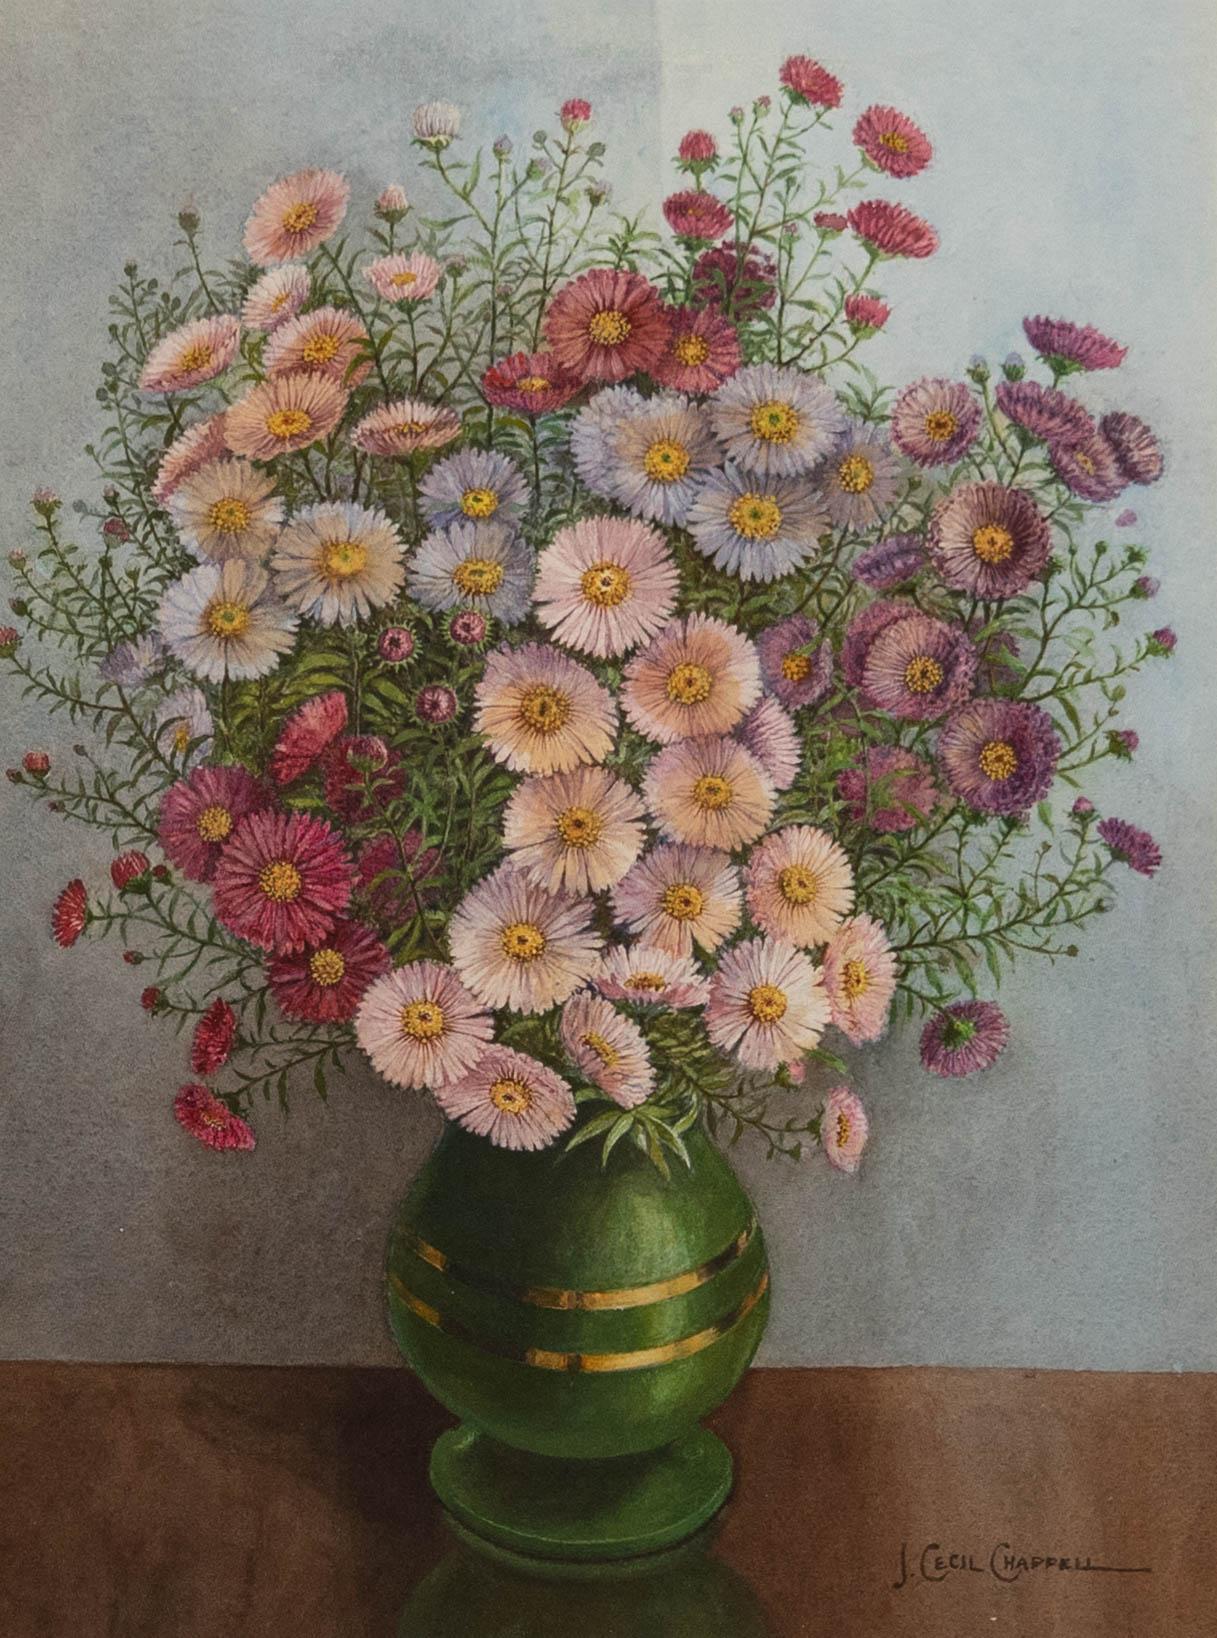 J. Cecil Chappell - 20th Century Watercolour, Asters - Art by Unknown